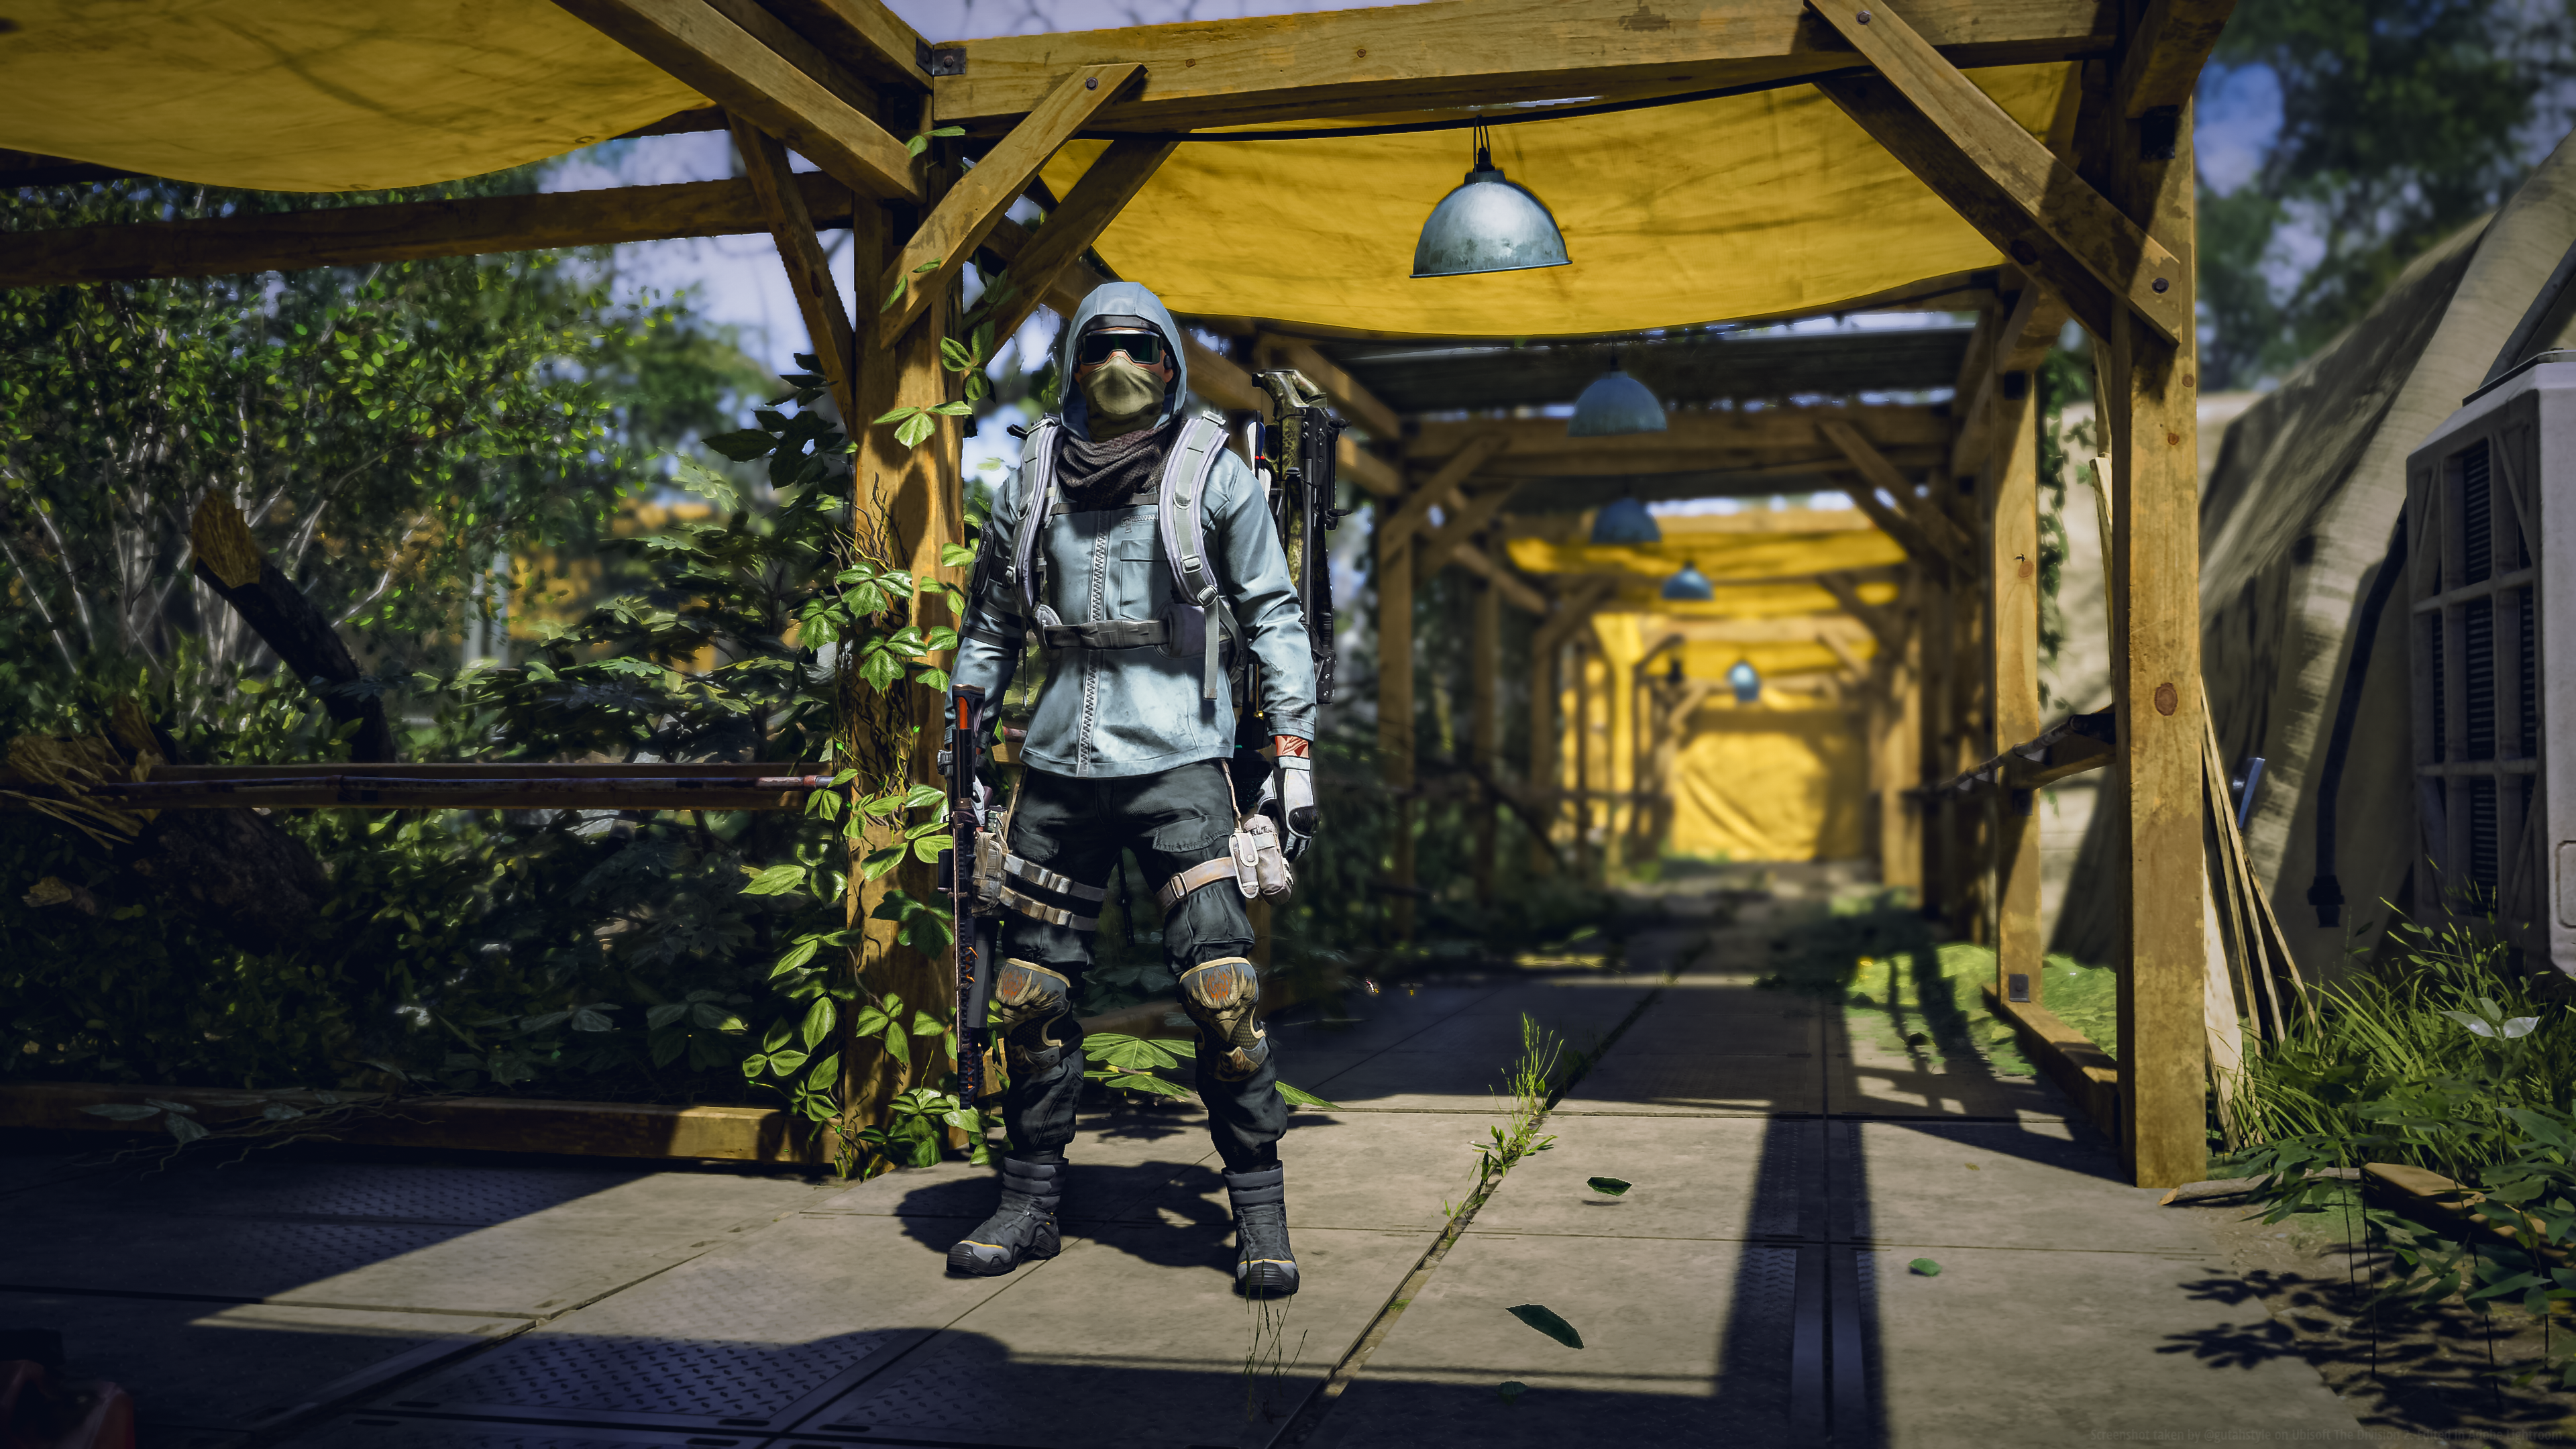 Tom Clancys The Division 2 Edit Screen Shot Game CG 3840x2160